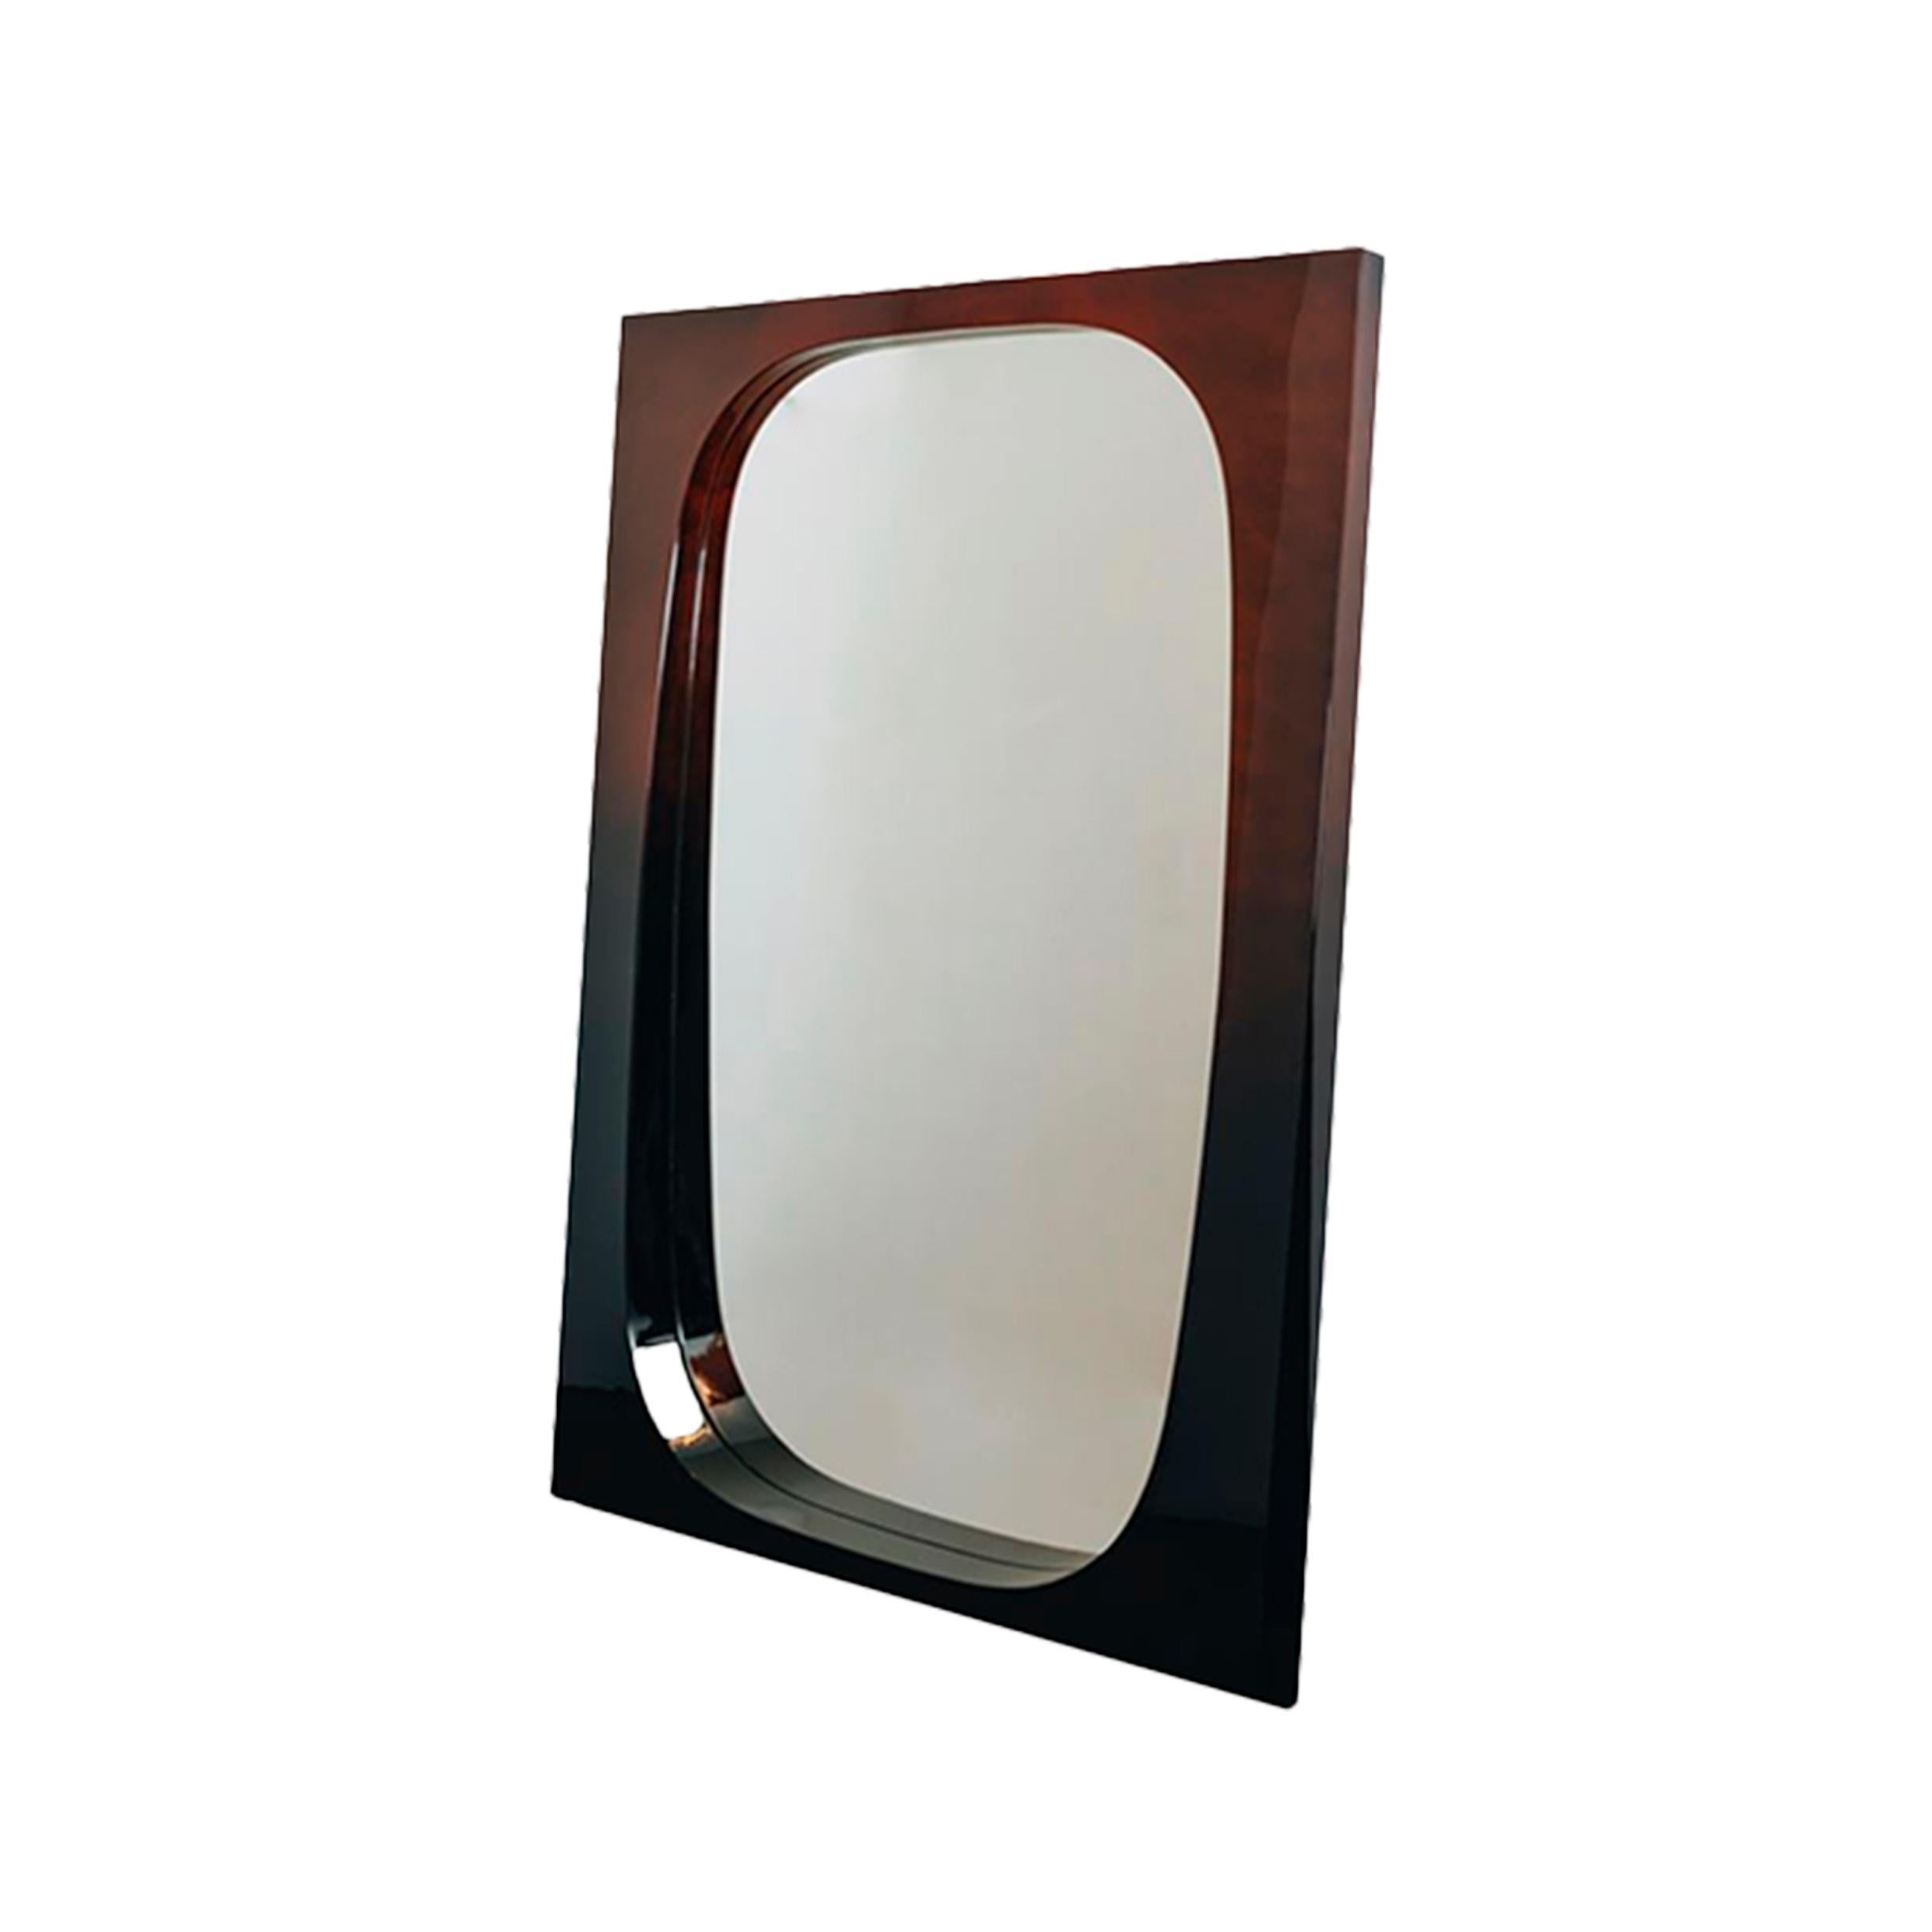 Portuguese Constantin Mirror, Gradient Lacquered Wood, Handcrafted in Portugal by Duistt